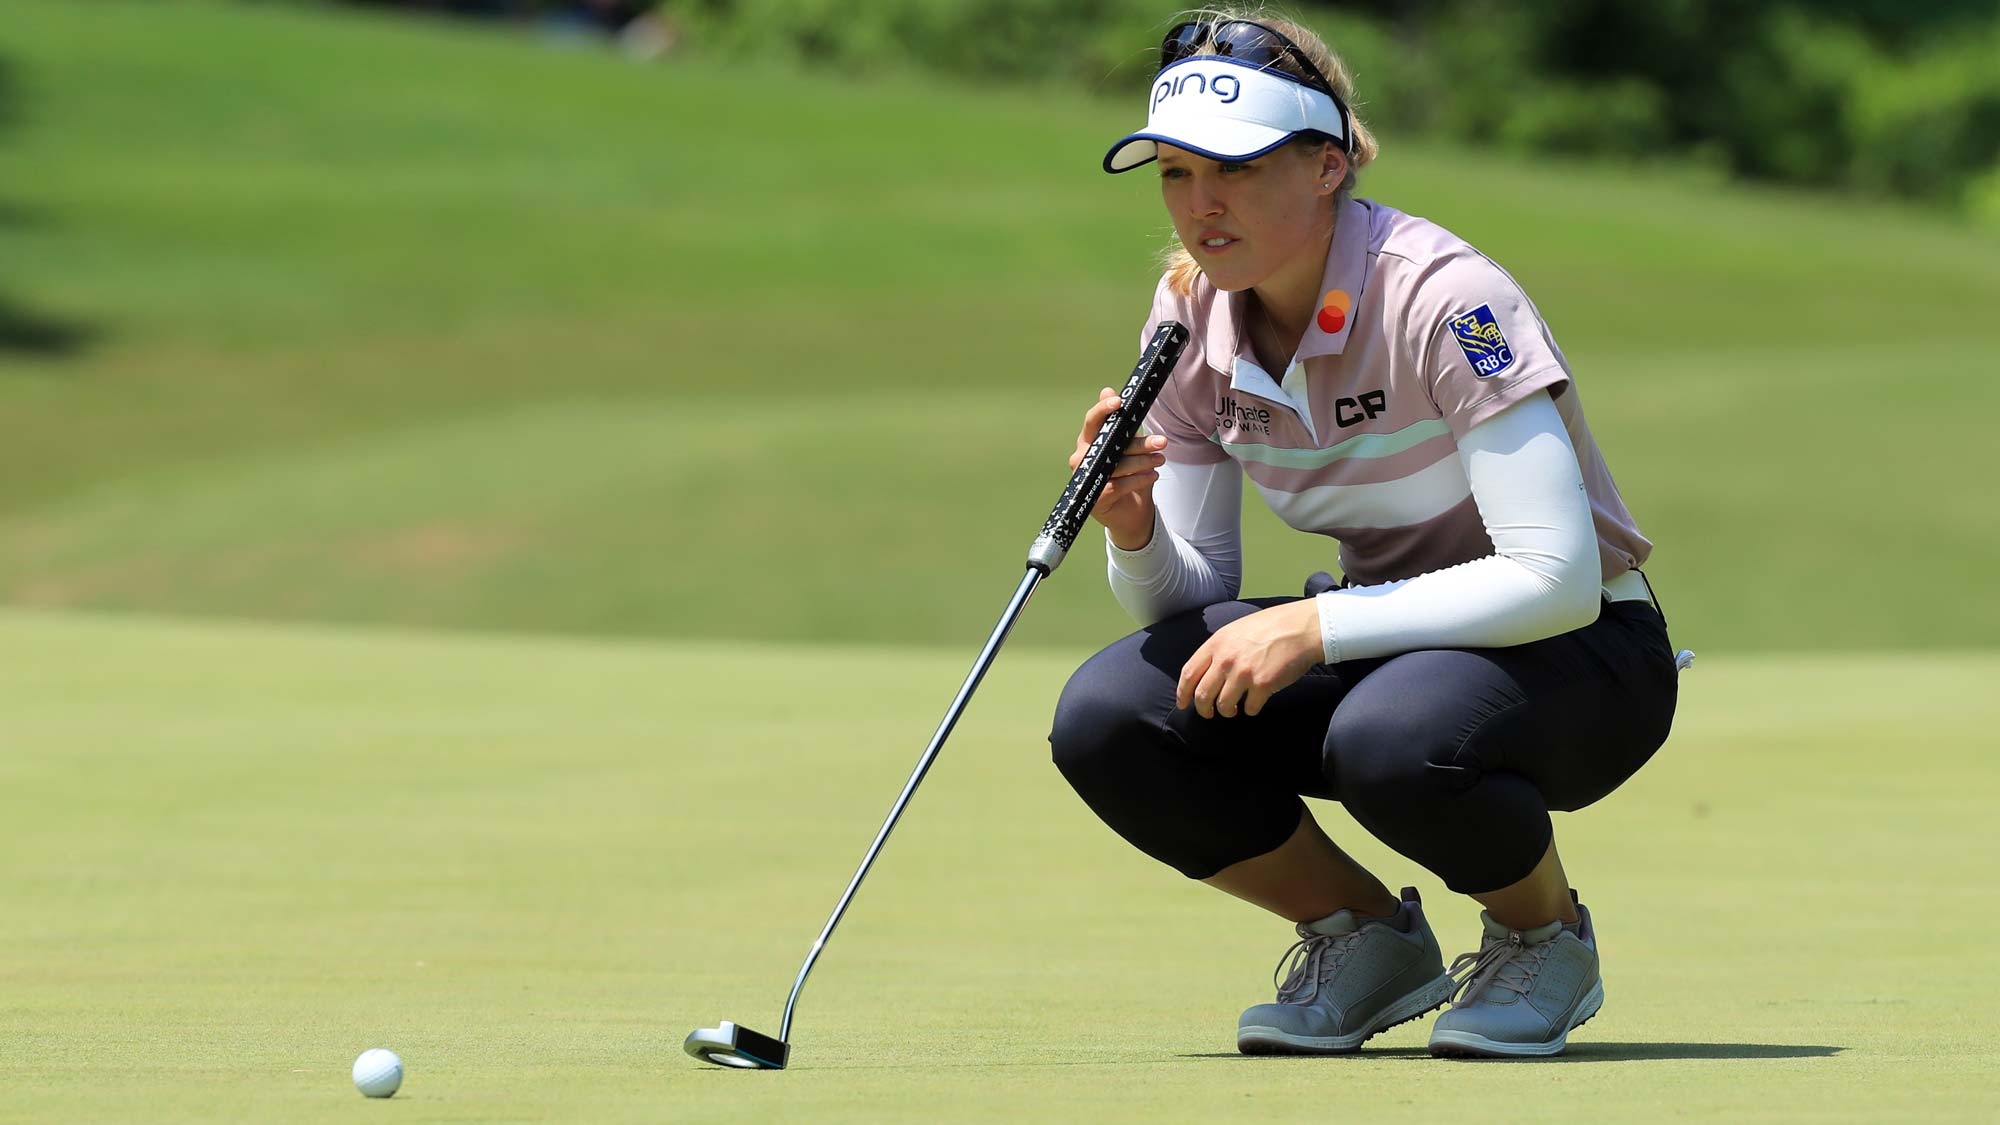 Brooke M. Henderson of Canada lines up her putt on the fourth hole during the first round of the Pure Silk Championship